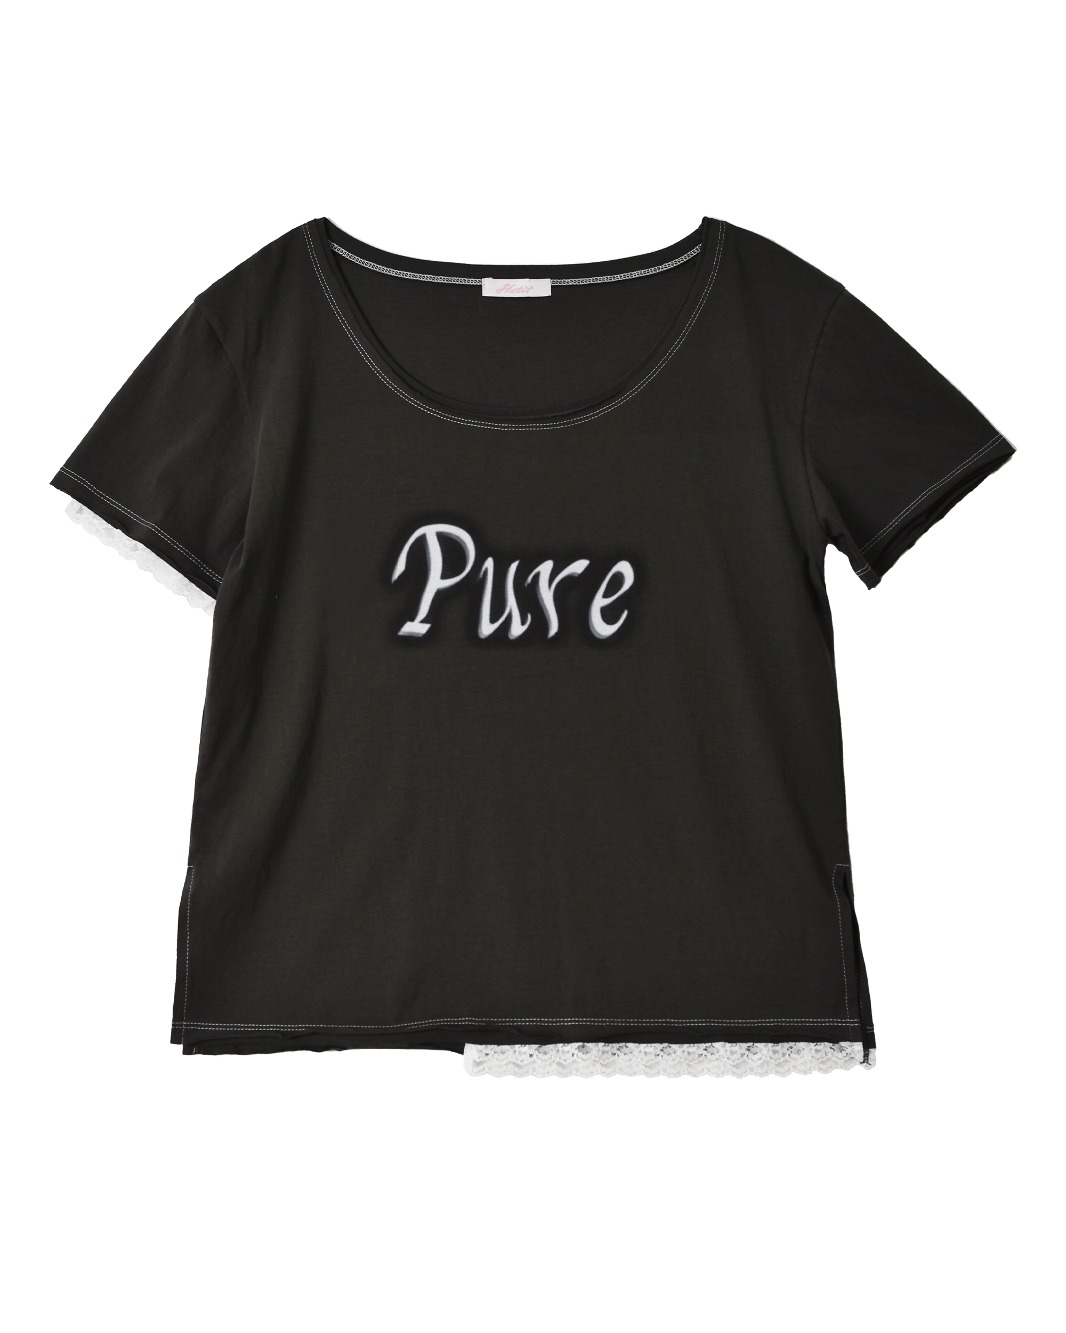 Pure Grunge T-shirt (Charcoal) (Pre-order ~5/10)